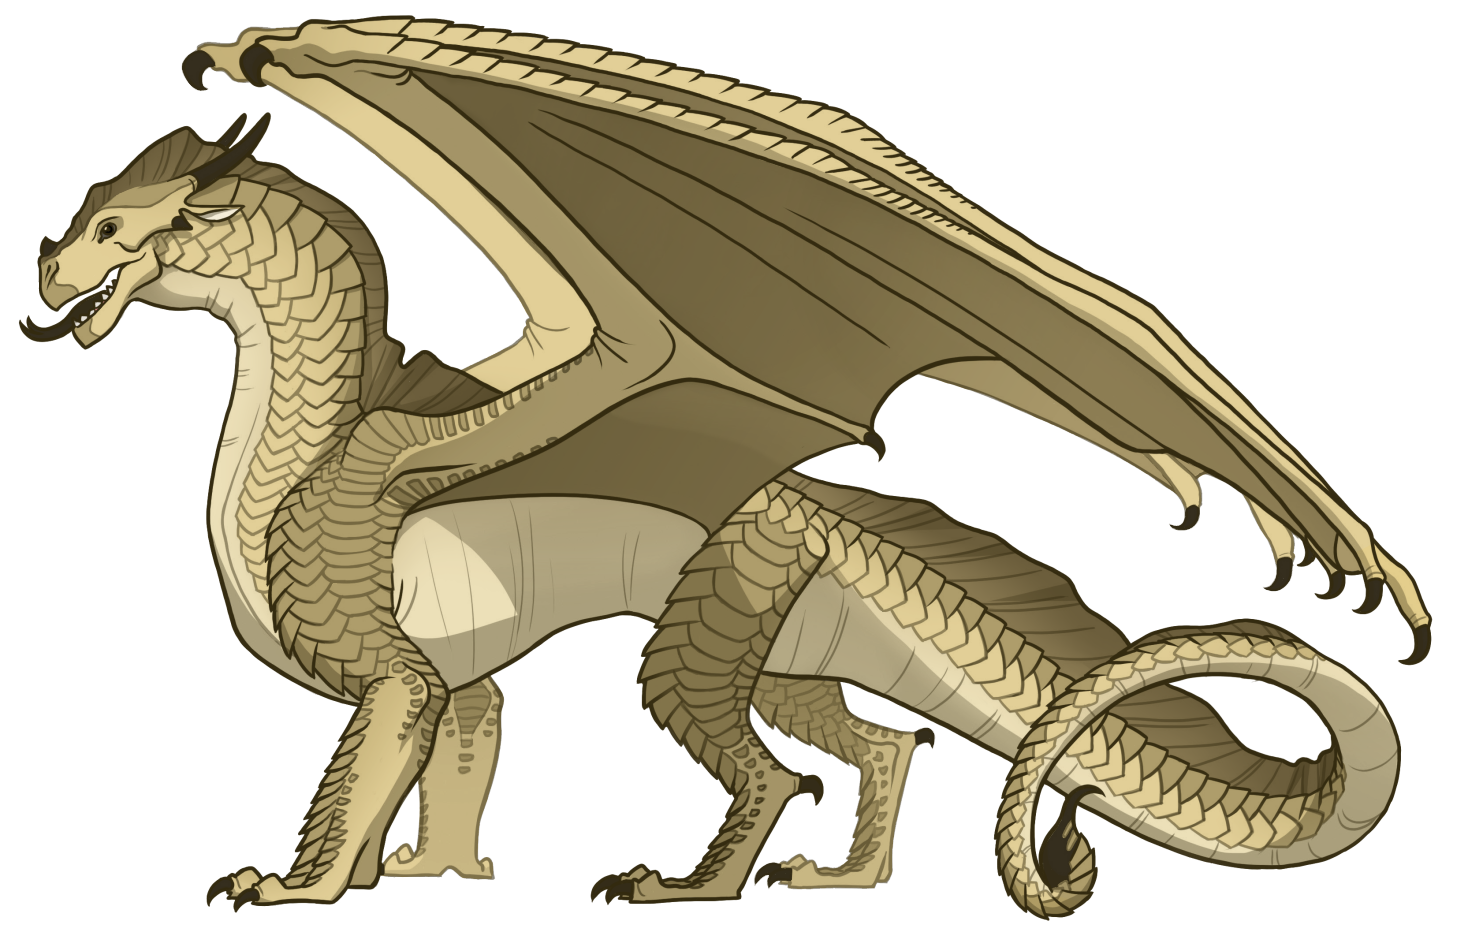 Dragonslayer, Wings of Fire Wiki